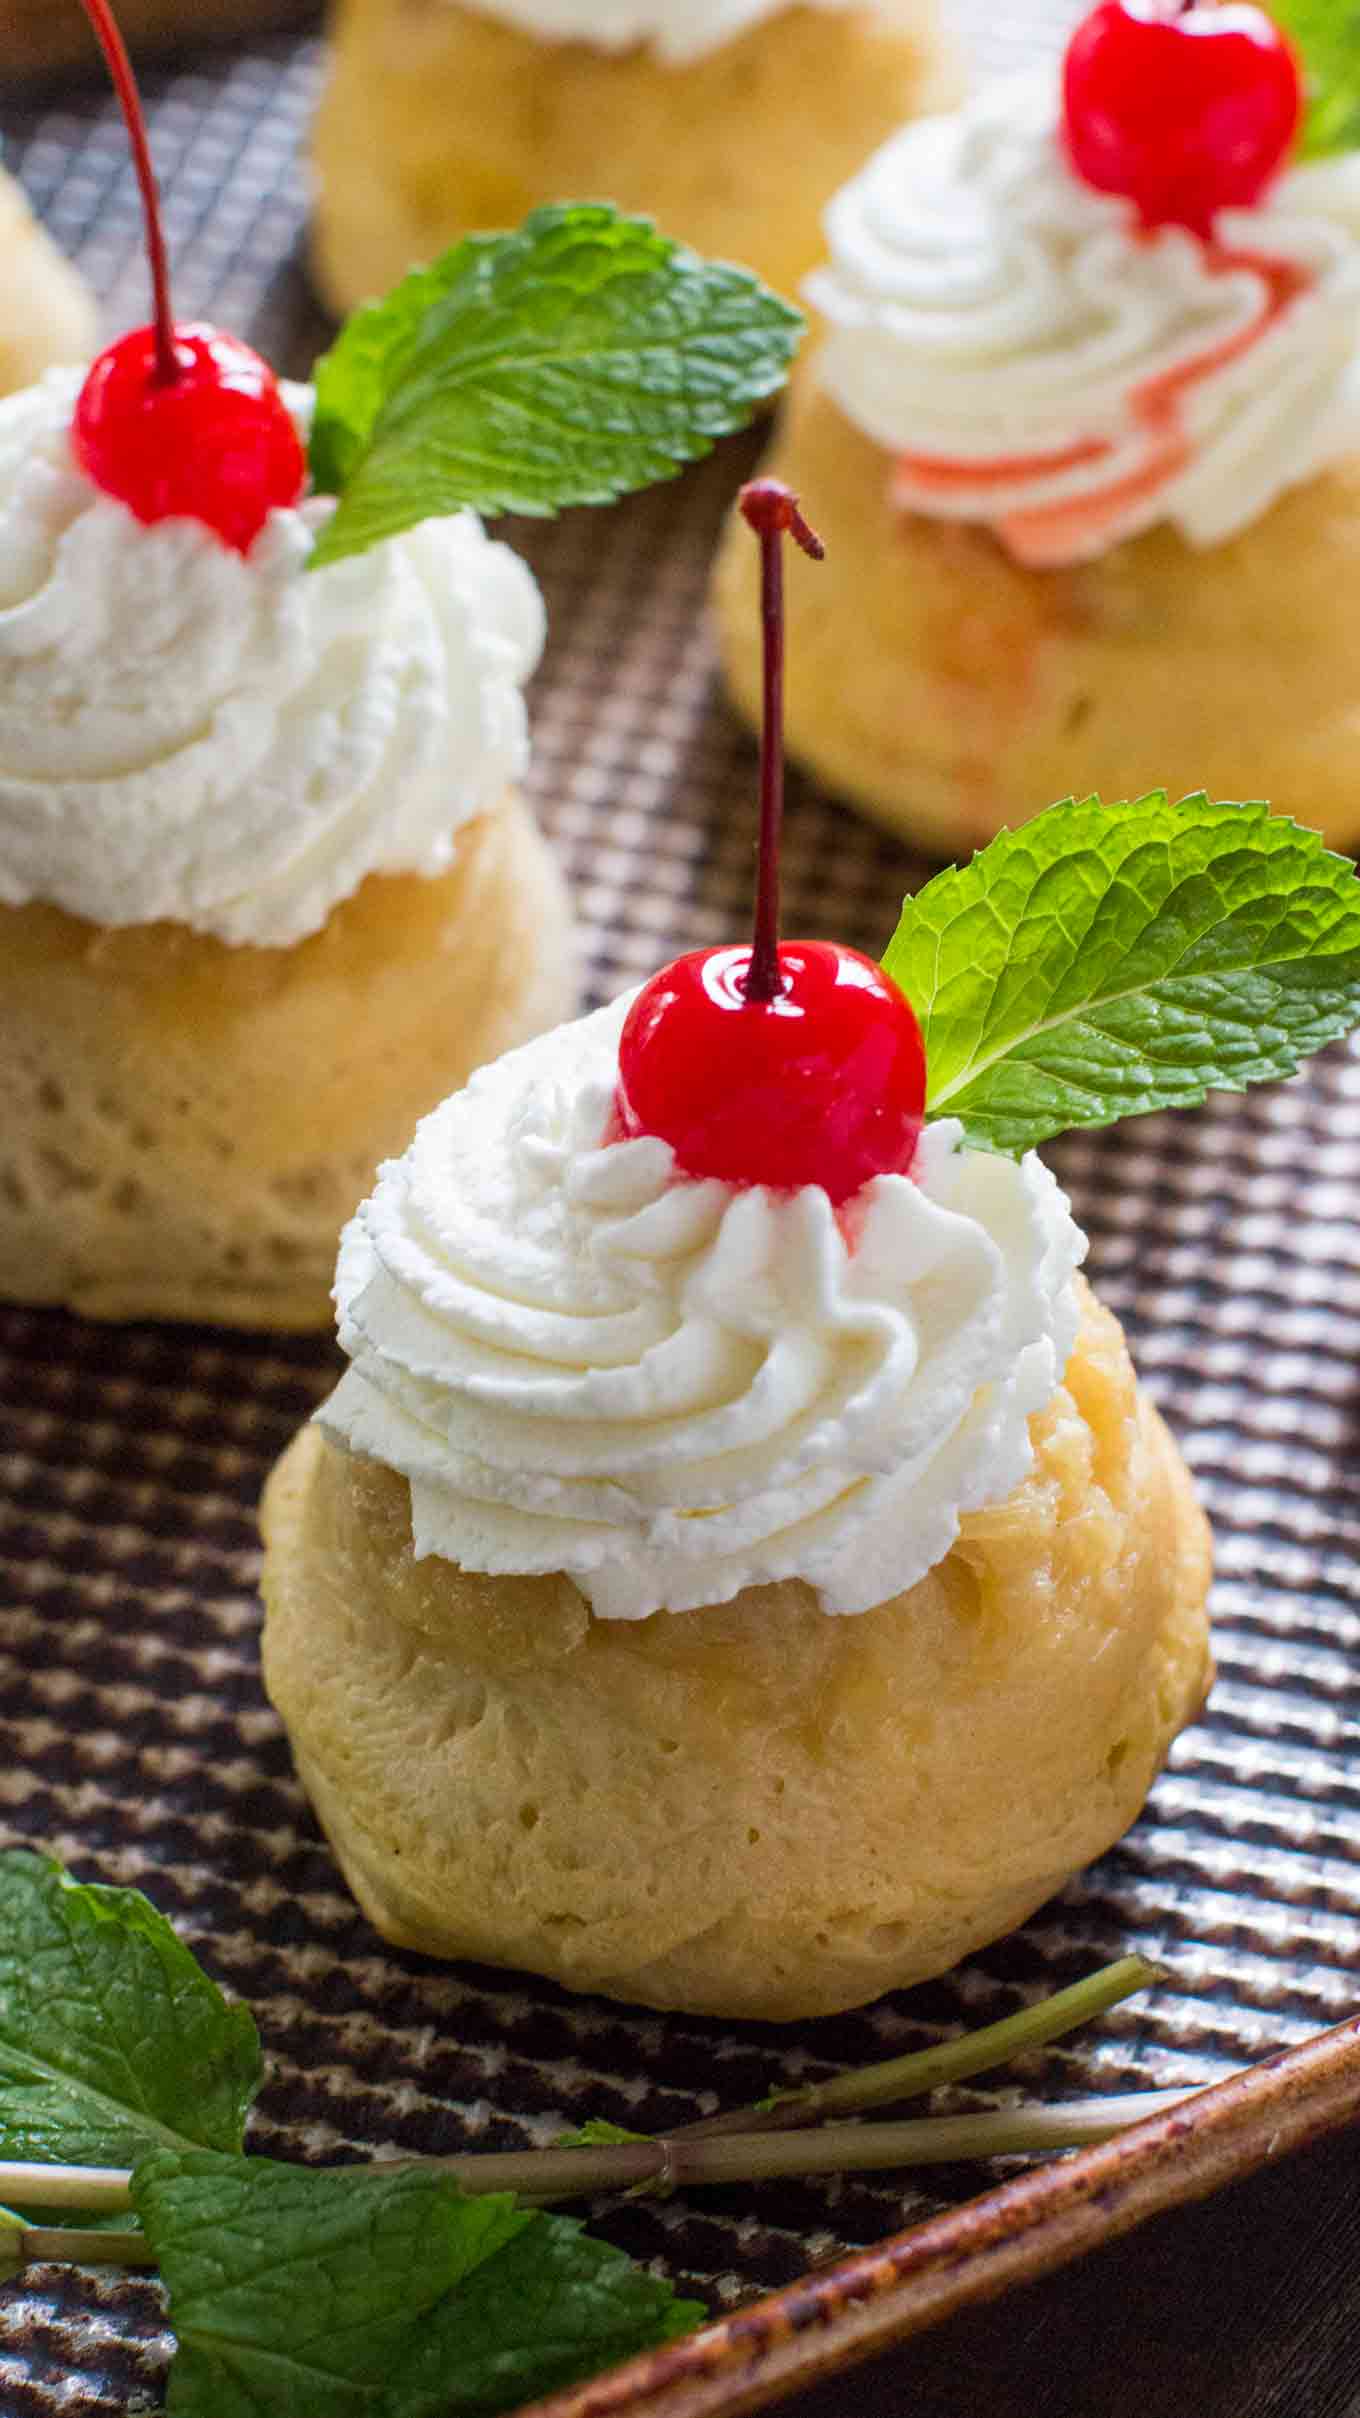 Pineapple Upside Down Cakes turns making dessert into a fun task! These cakes are made with biscuit dough and are ready in 30 minutes!